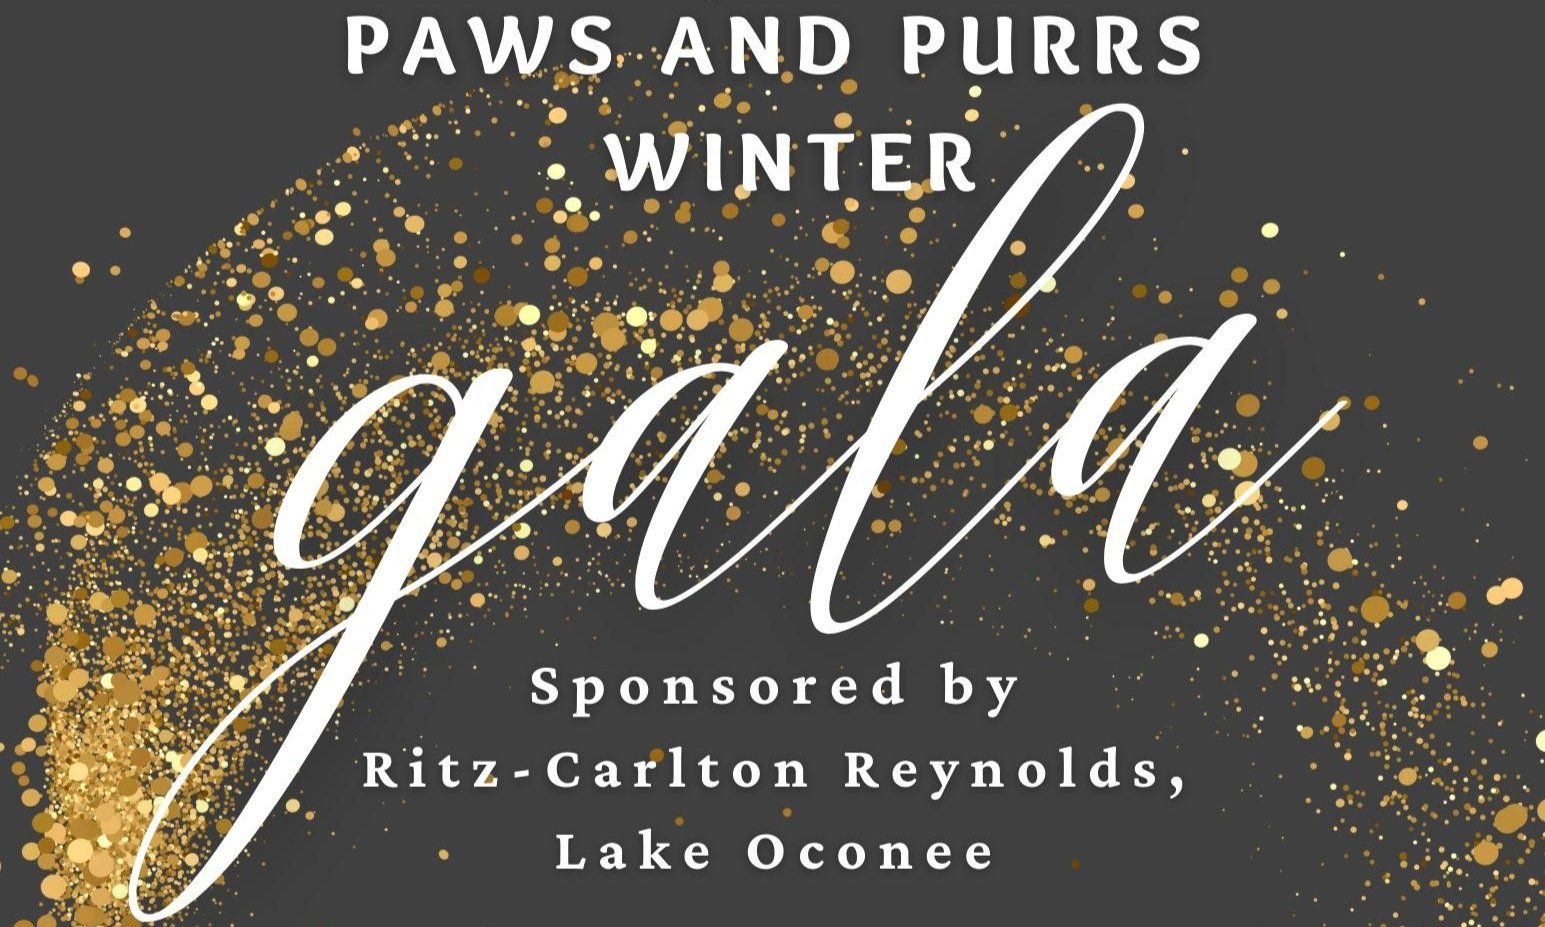 Rescue Dog Wines is proud to sponsor Paws and Purrs Winter Gala Benefiting the Humane Society of Morgan County